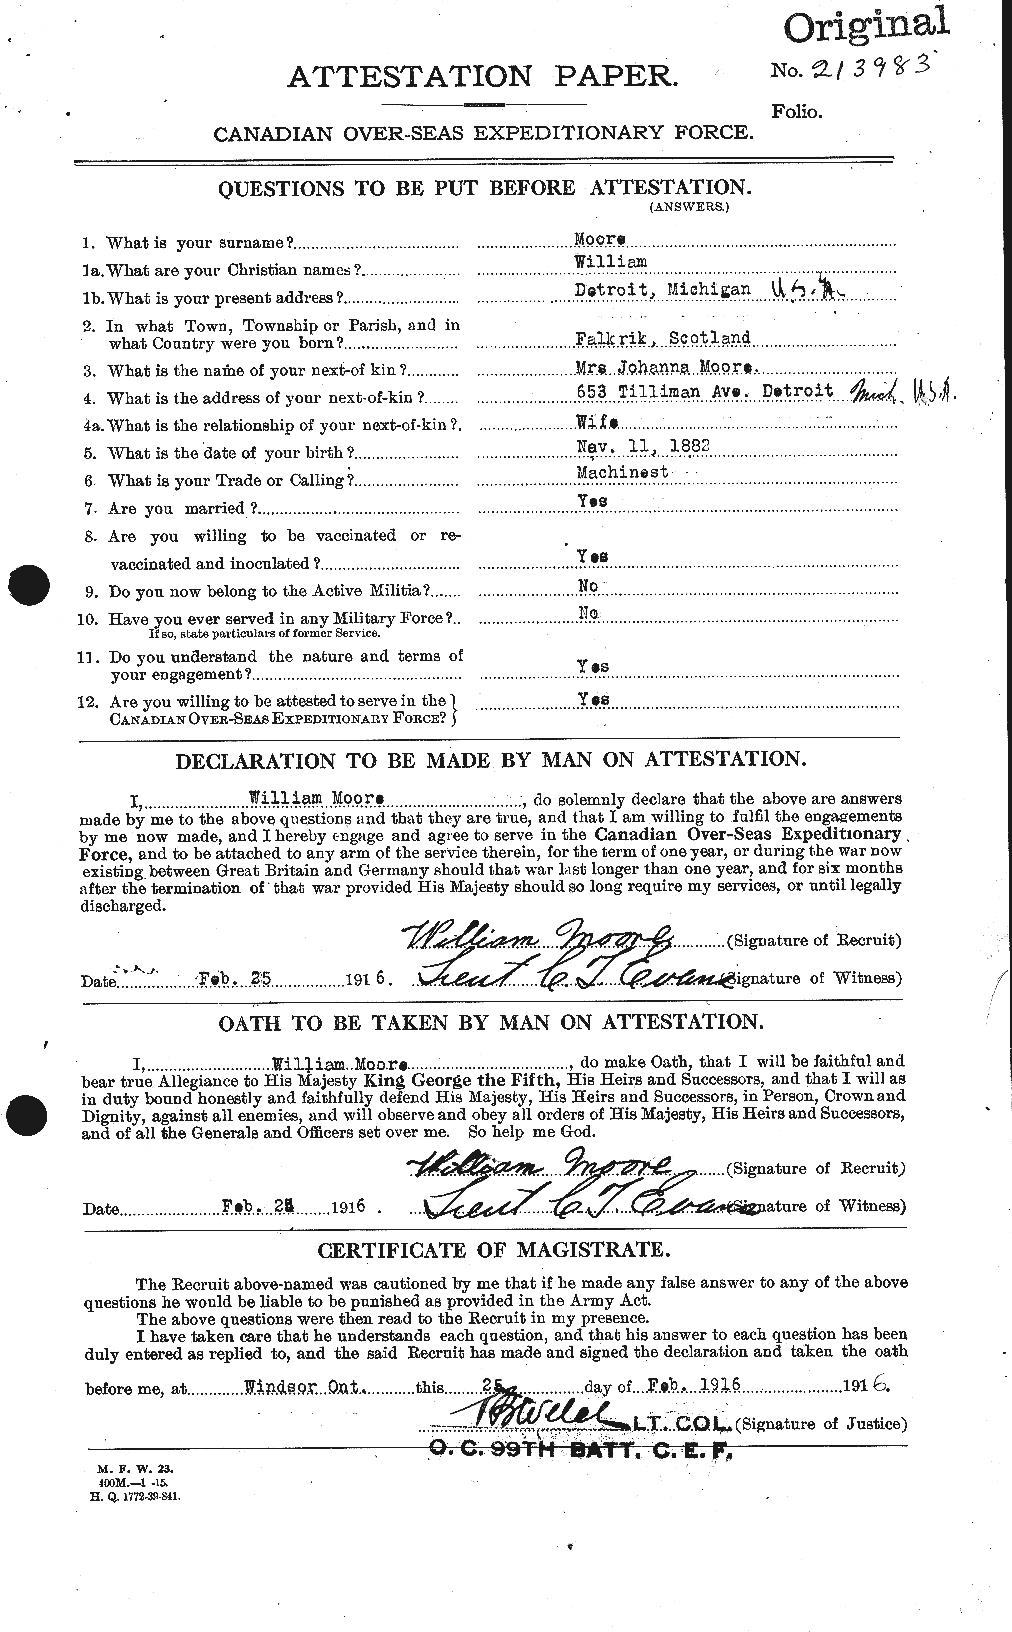 Personnel Records of the First World War - CEF 505761a